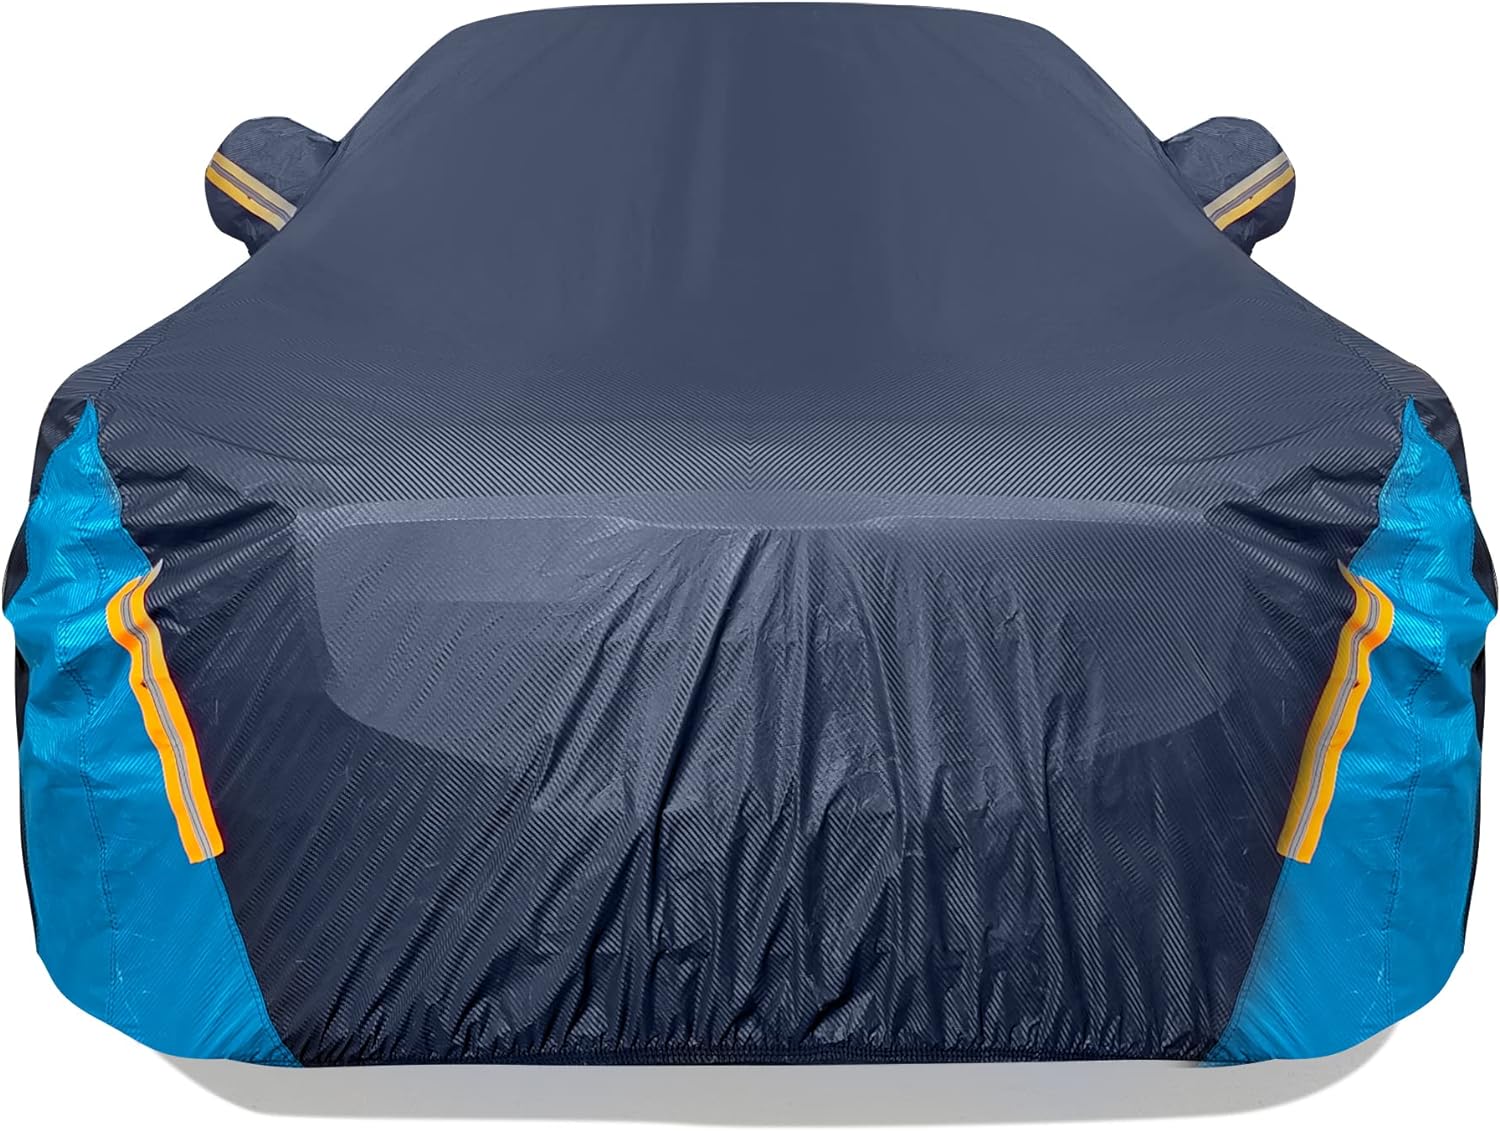 Car Cover Waterproof All Weather for Automobiles, 6 Layers Outdoor Full Exterior Cover Rain Sun UV Snowproof Protection with Zipper Cotton, Mirror Pocket for Sedan (190-195 inch)